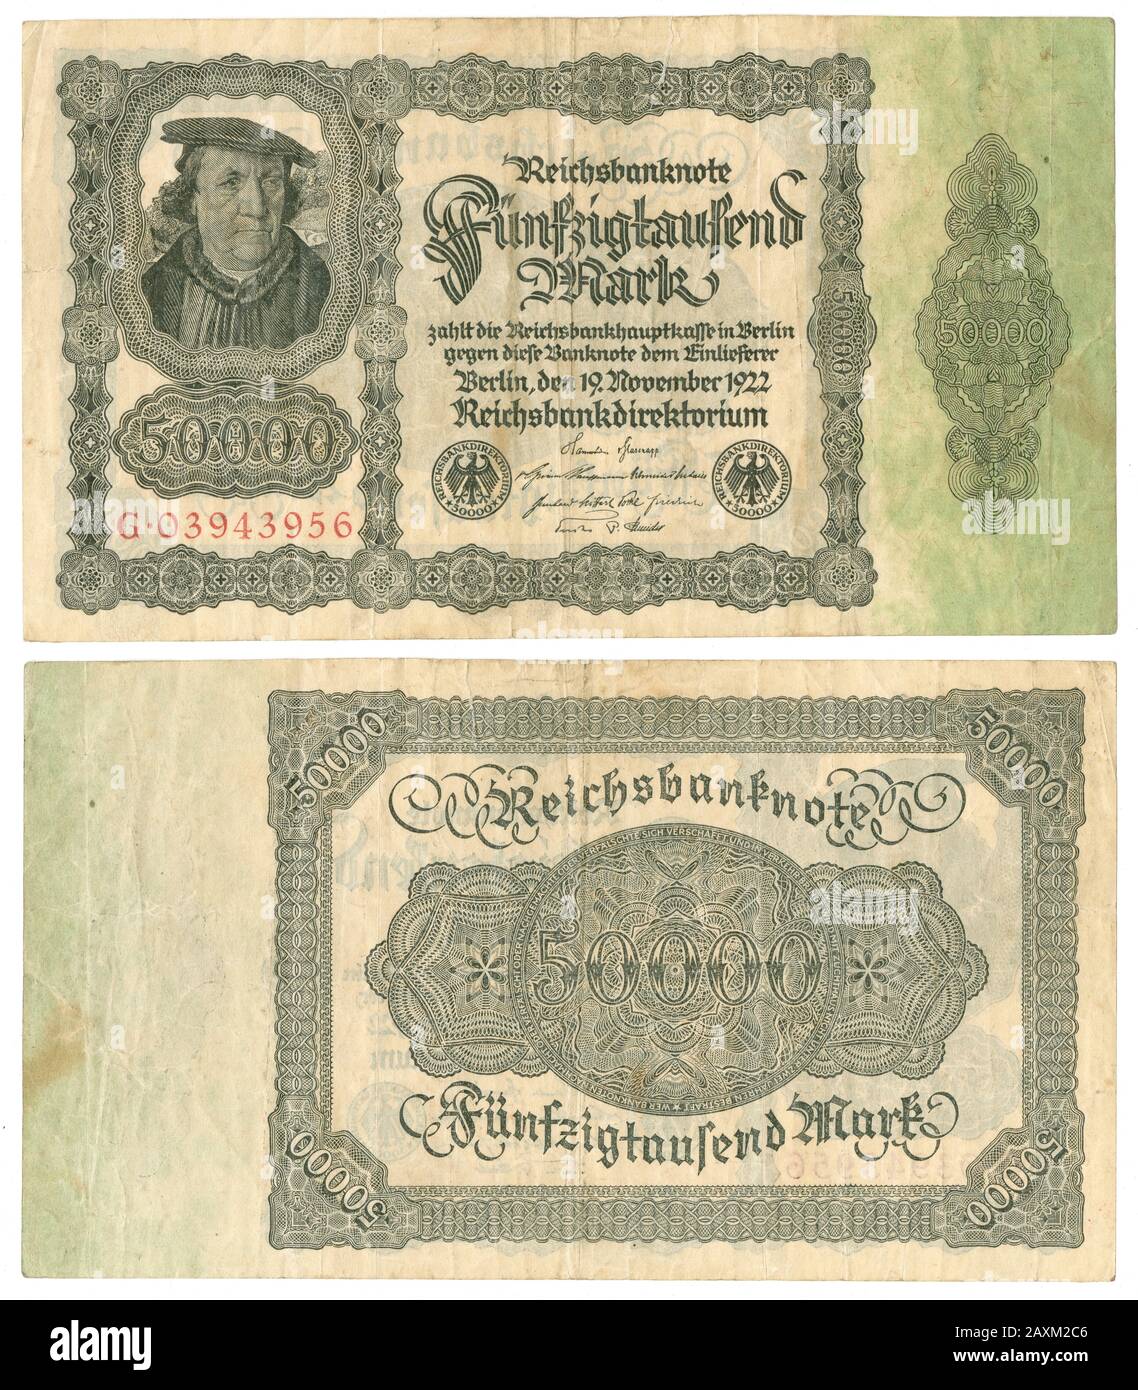 Antique 1922 German 50,000 mark currency bank note, obverse and reverse. Stock Photo